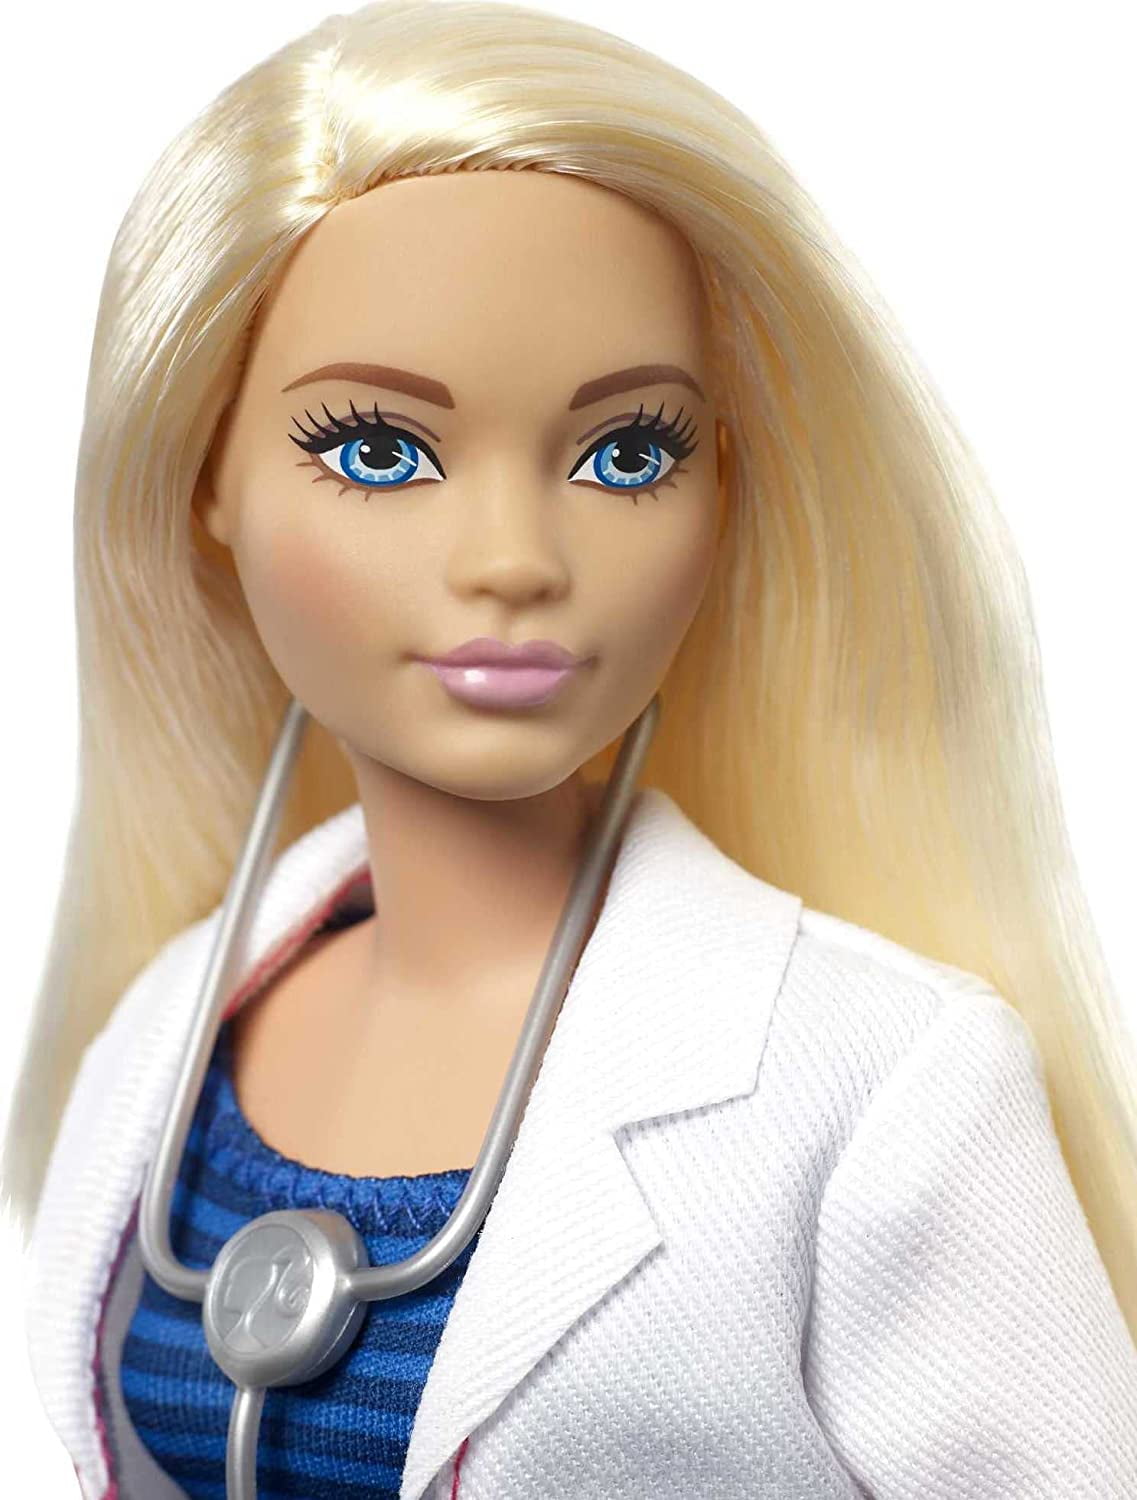 Barbie Chooses Women In Sports For Career Of The Year